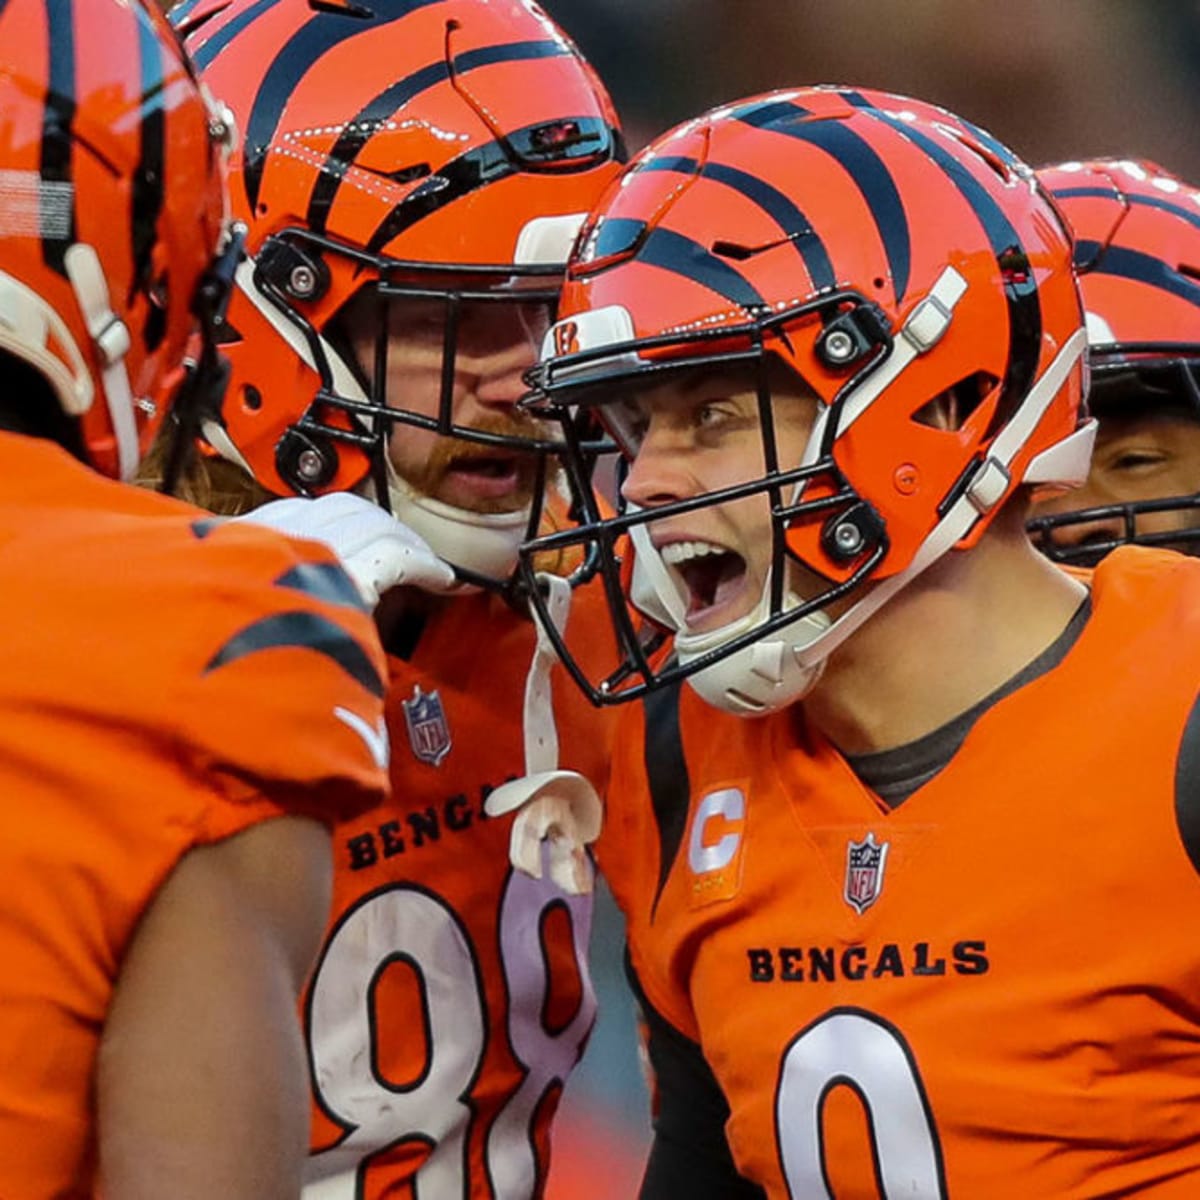 Bengals vs. Chiefs, AFC Championship: Who won their game in the 2021  regular season? - DraftKings Network